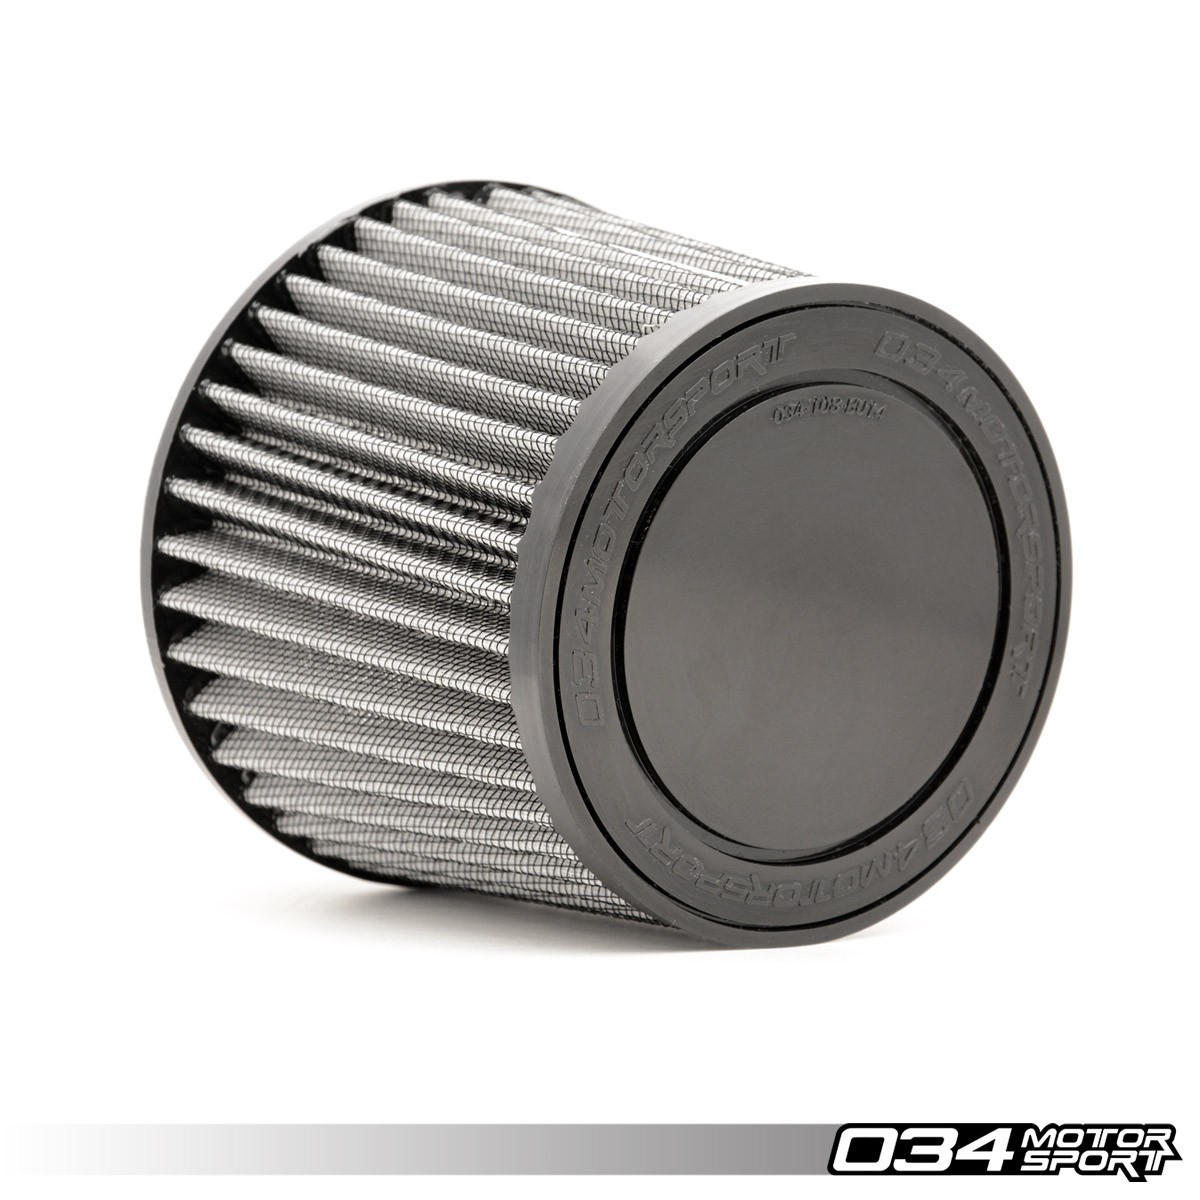 2.75" Stainless Steel Cold Air Short Ram Cone Intake Filter Black for Audi BMW